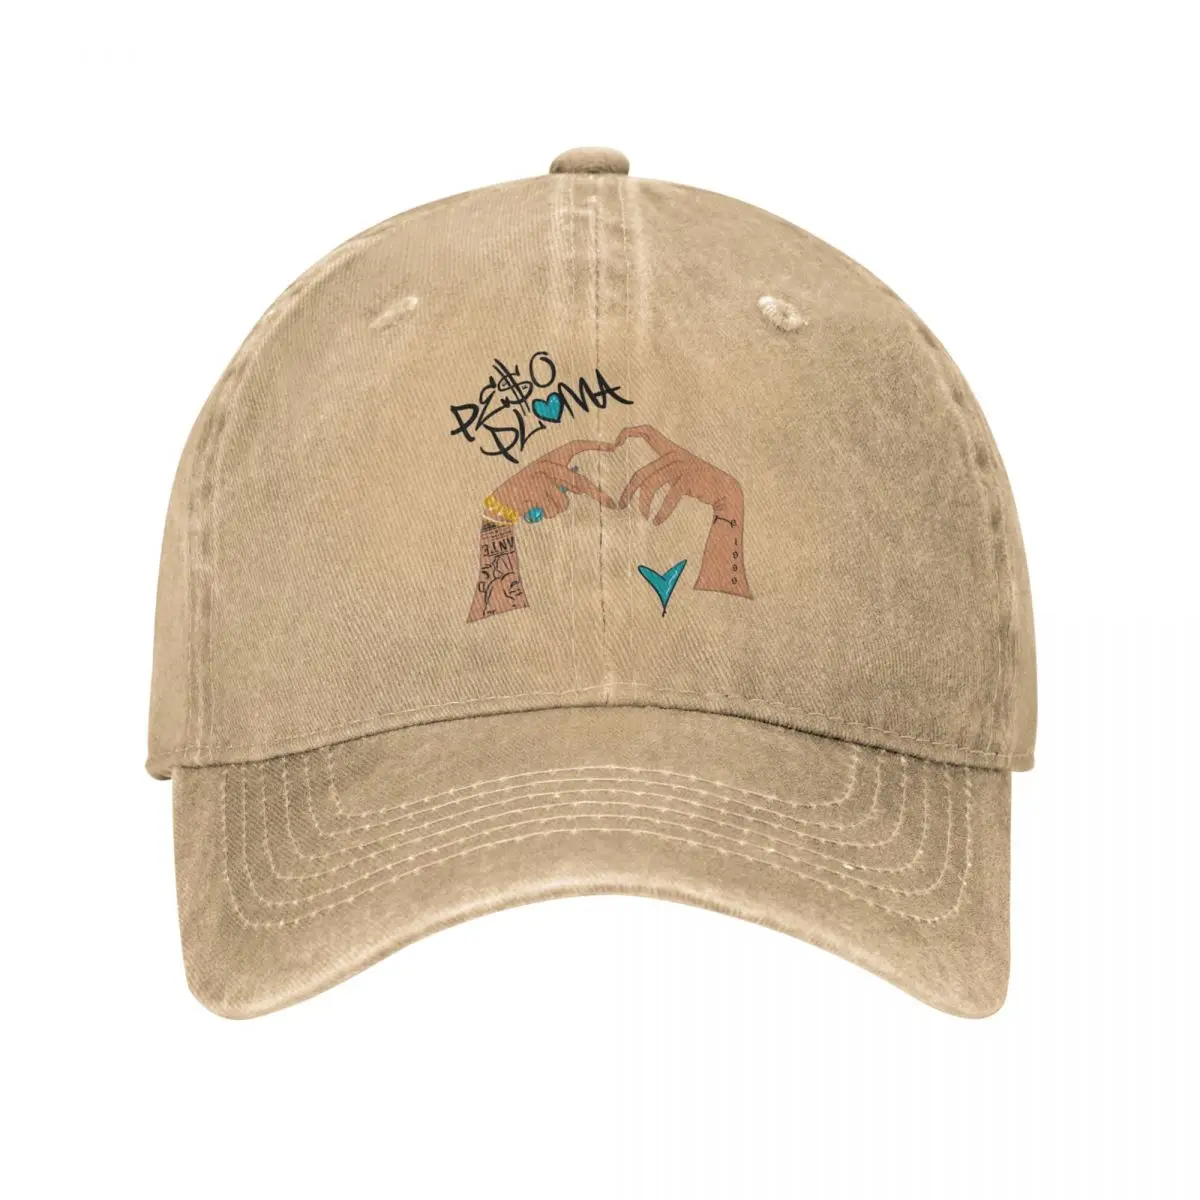 

Peso Pluma Tour 2023 Baseball Cap Outfit Vintage Distressed Cotton Cool Heart Dad Hat Unisex Outdoor Summer Gift